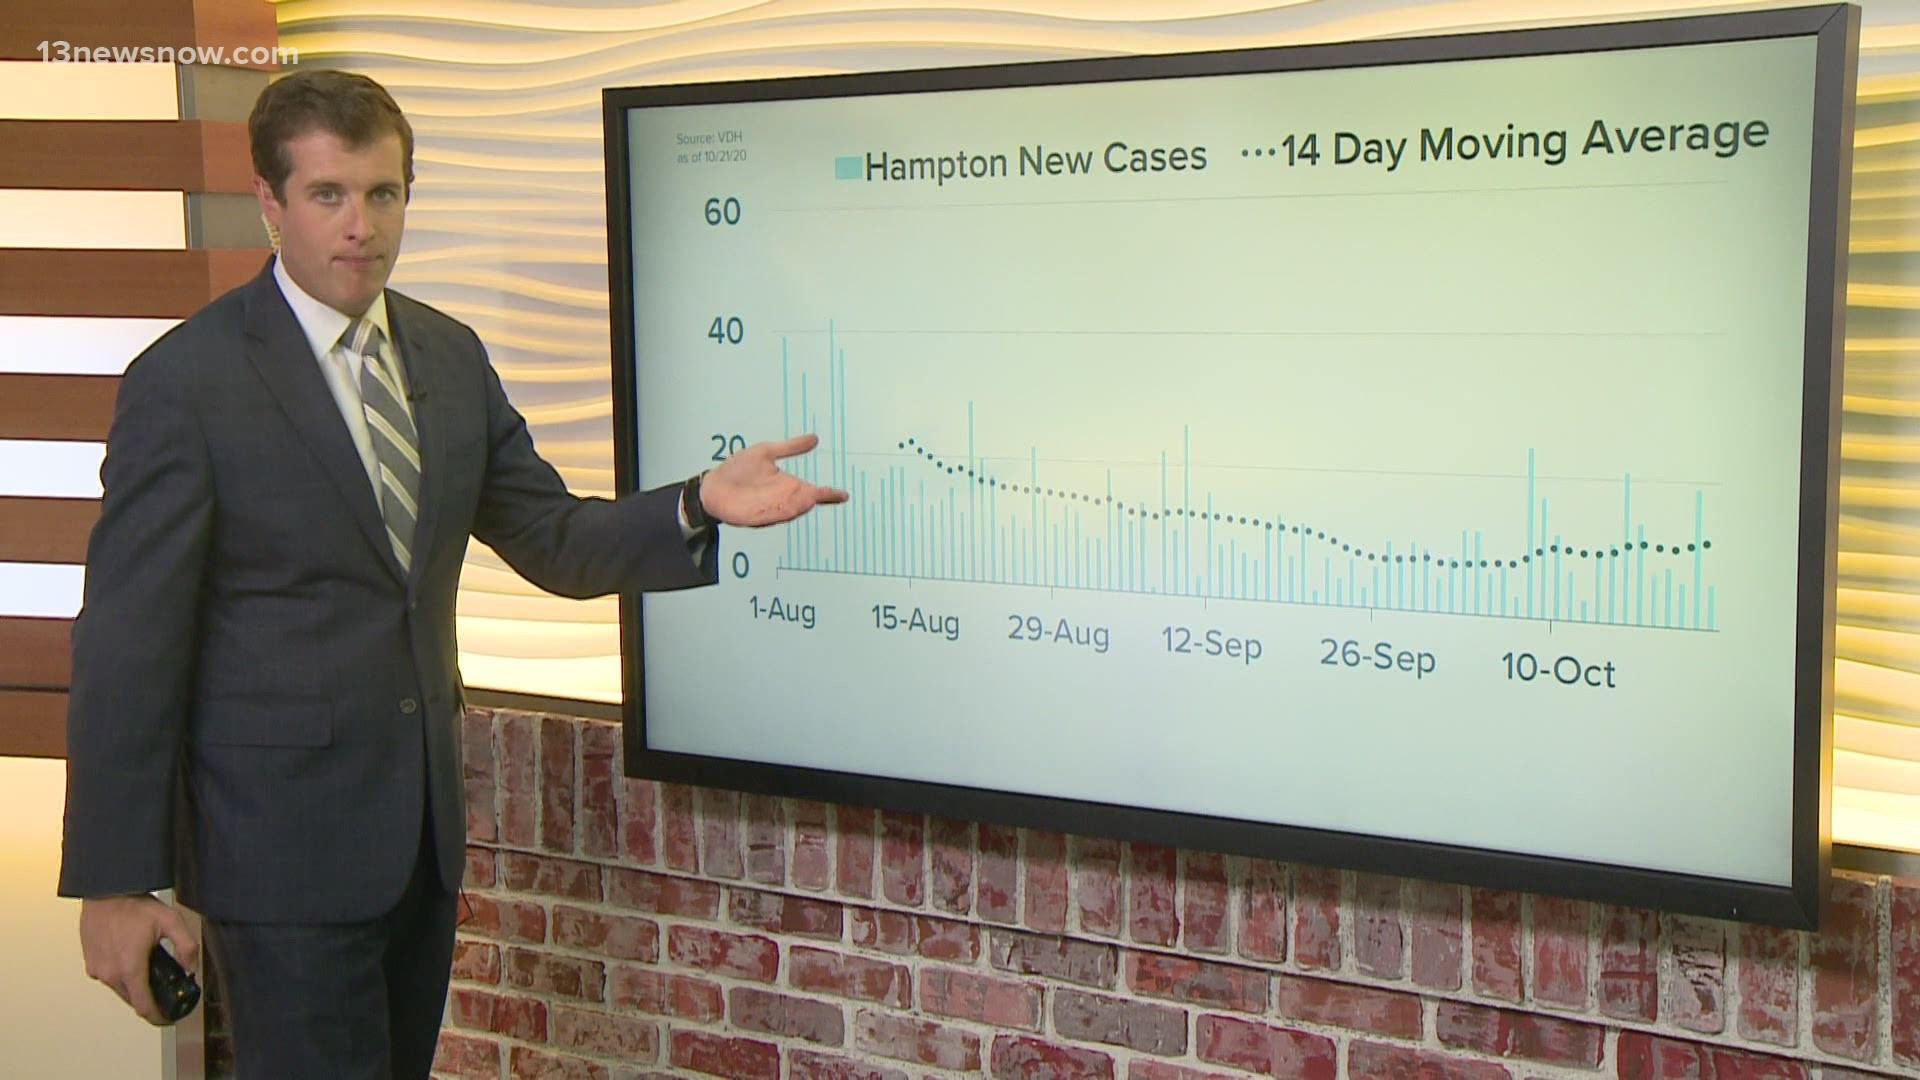 13News Now's Dan Kennedy analyzes the most recent data to plot out virus trends for Hampton Roads on October 21, 2020.